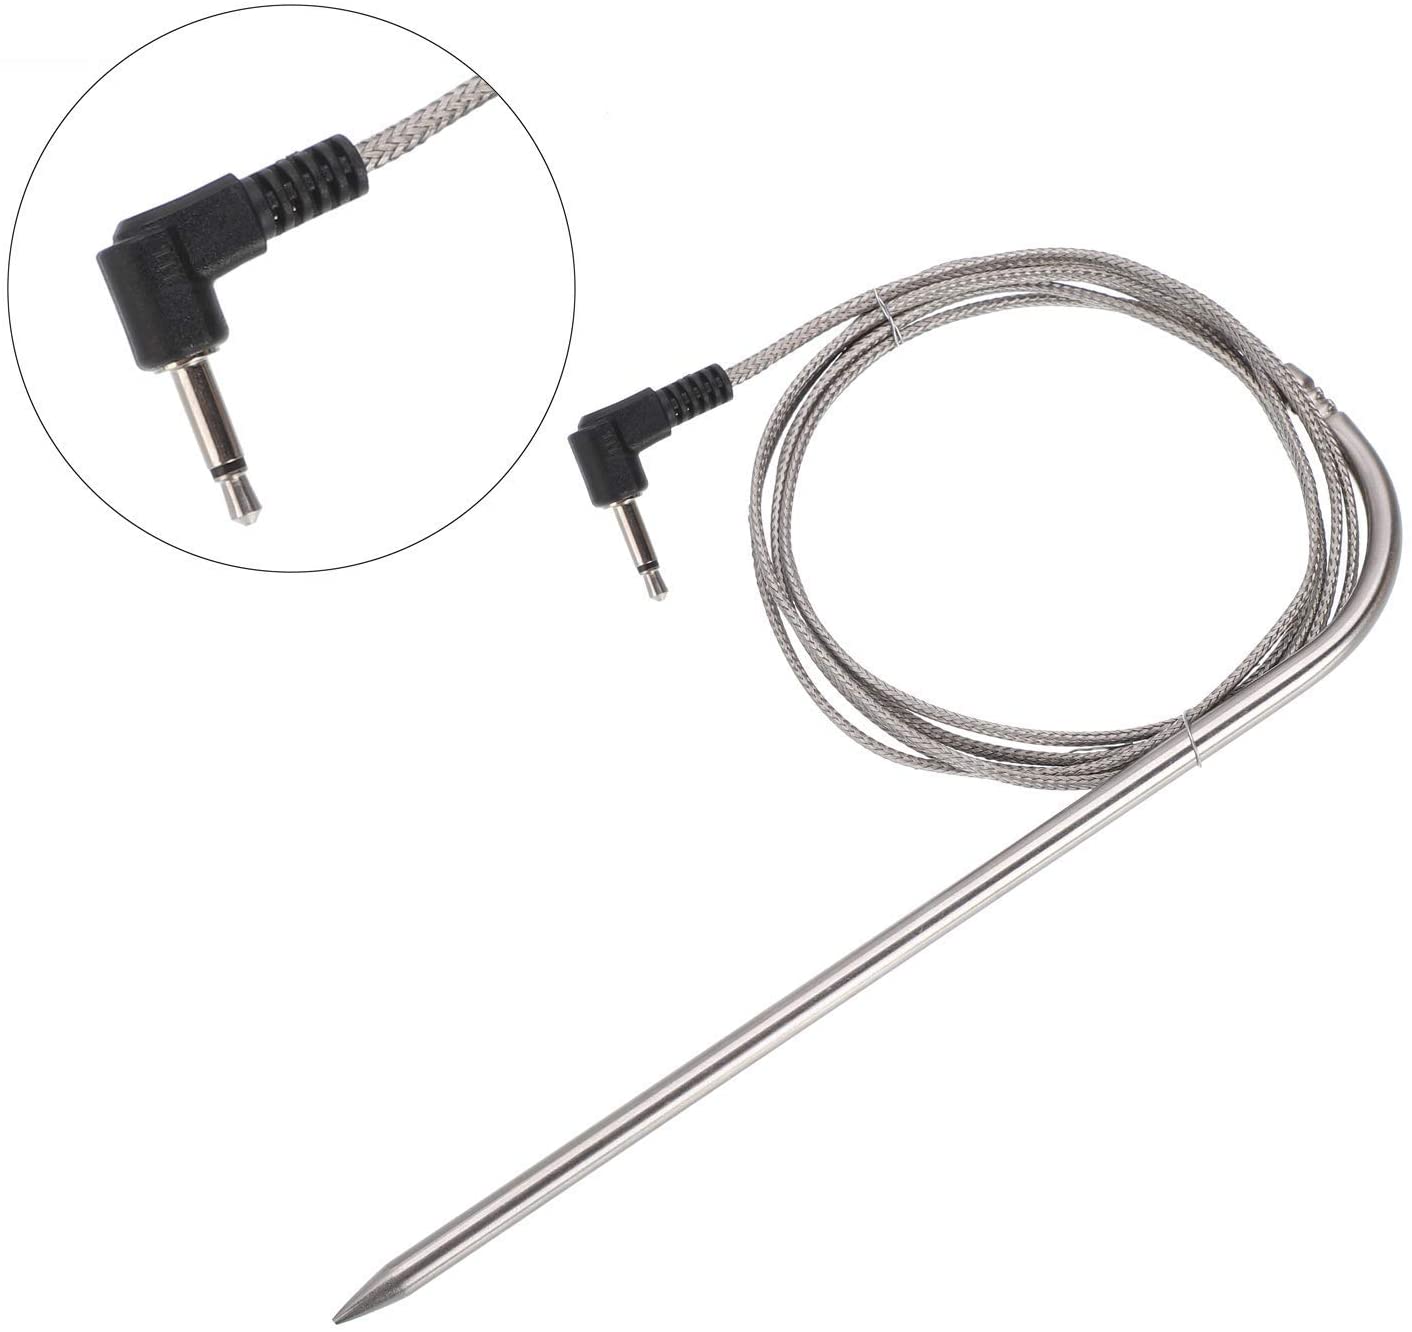 2 Pack Replacement Meat Probe for Pit Boss Pellet Grill Smokers Parts,  3.5mm Plug Thermometer Probe Replacement Temperature Probe with 2 Stainless